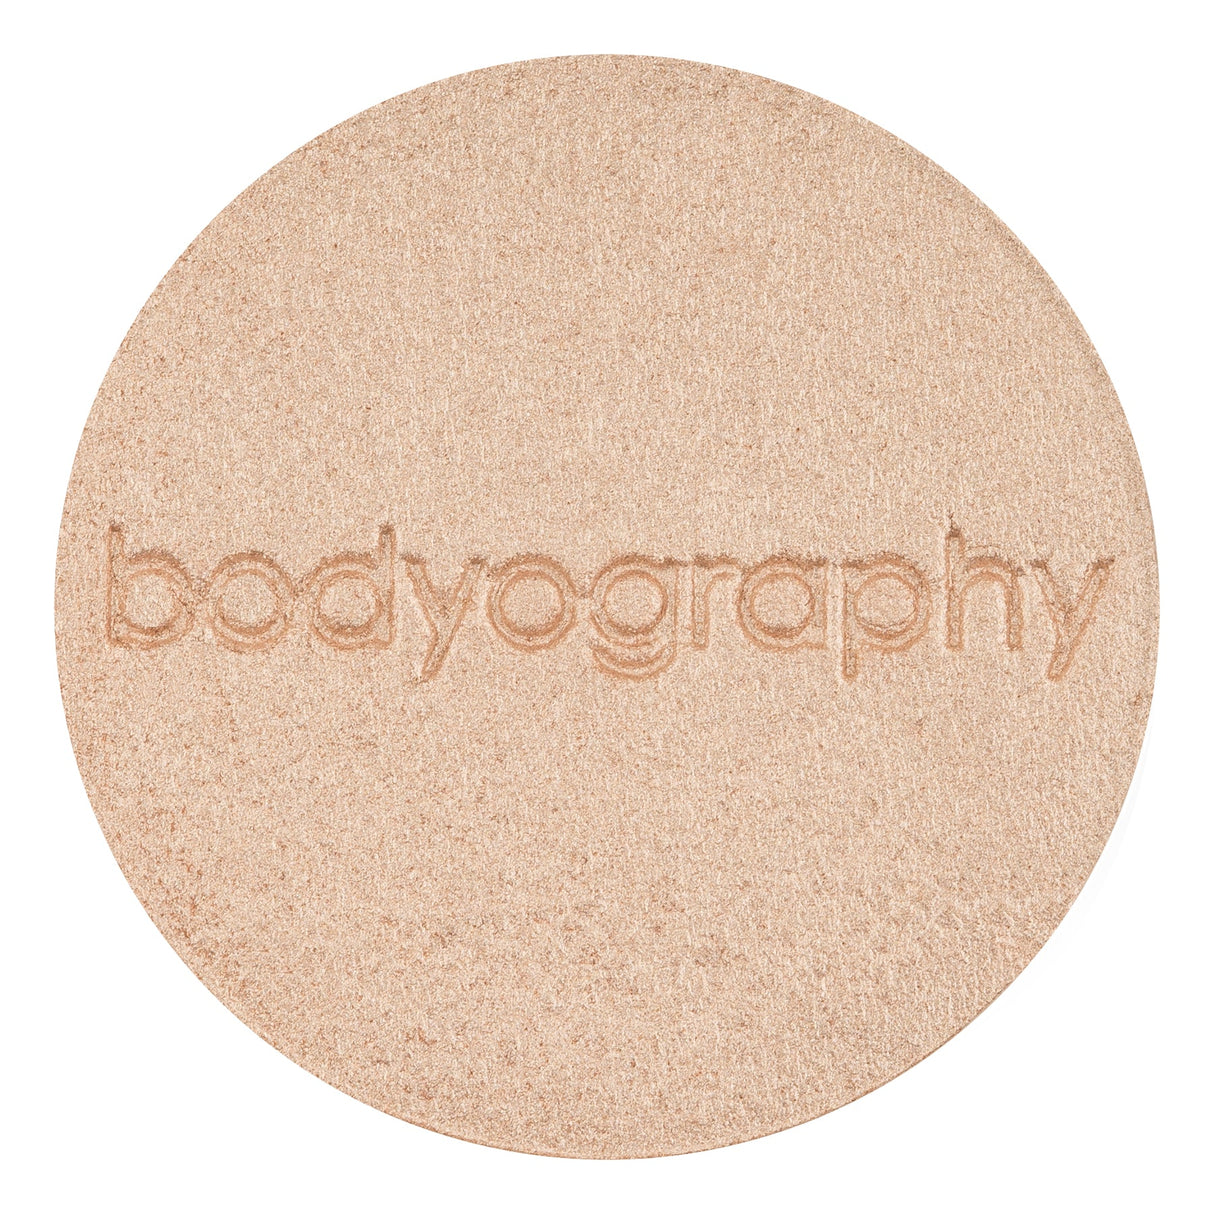 From Within Pressed Highlighter-Bodyography